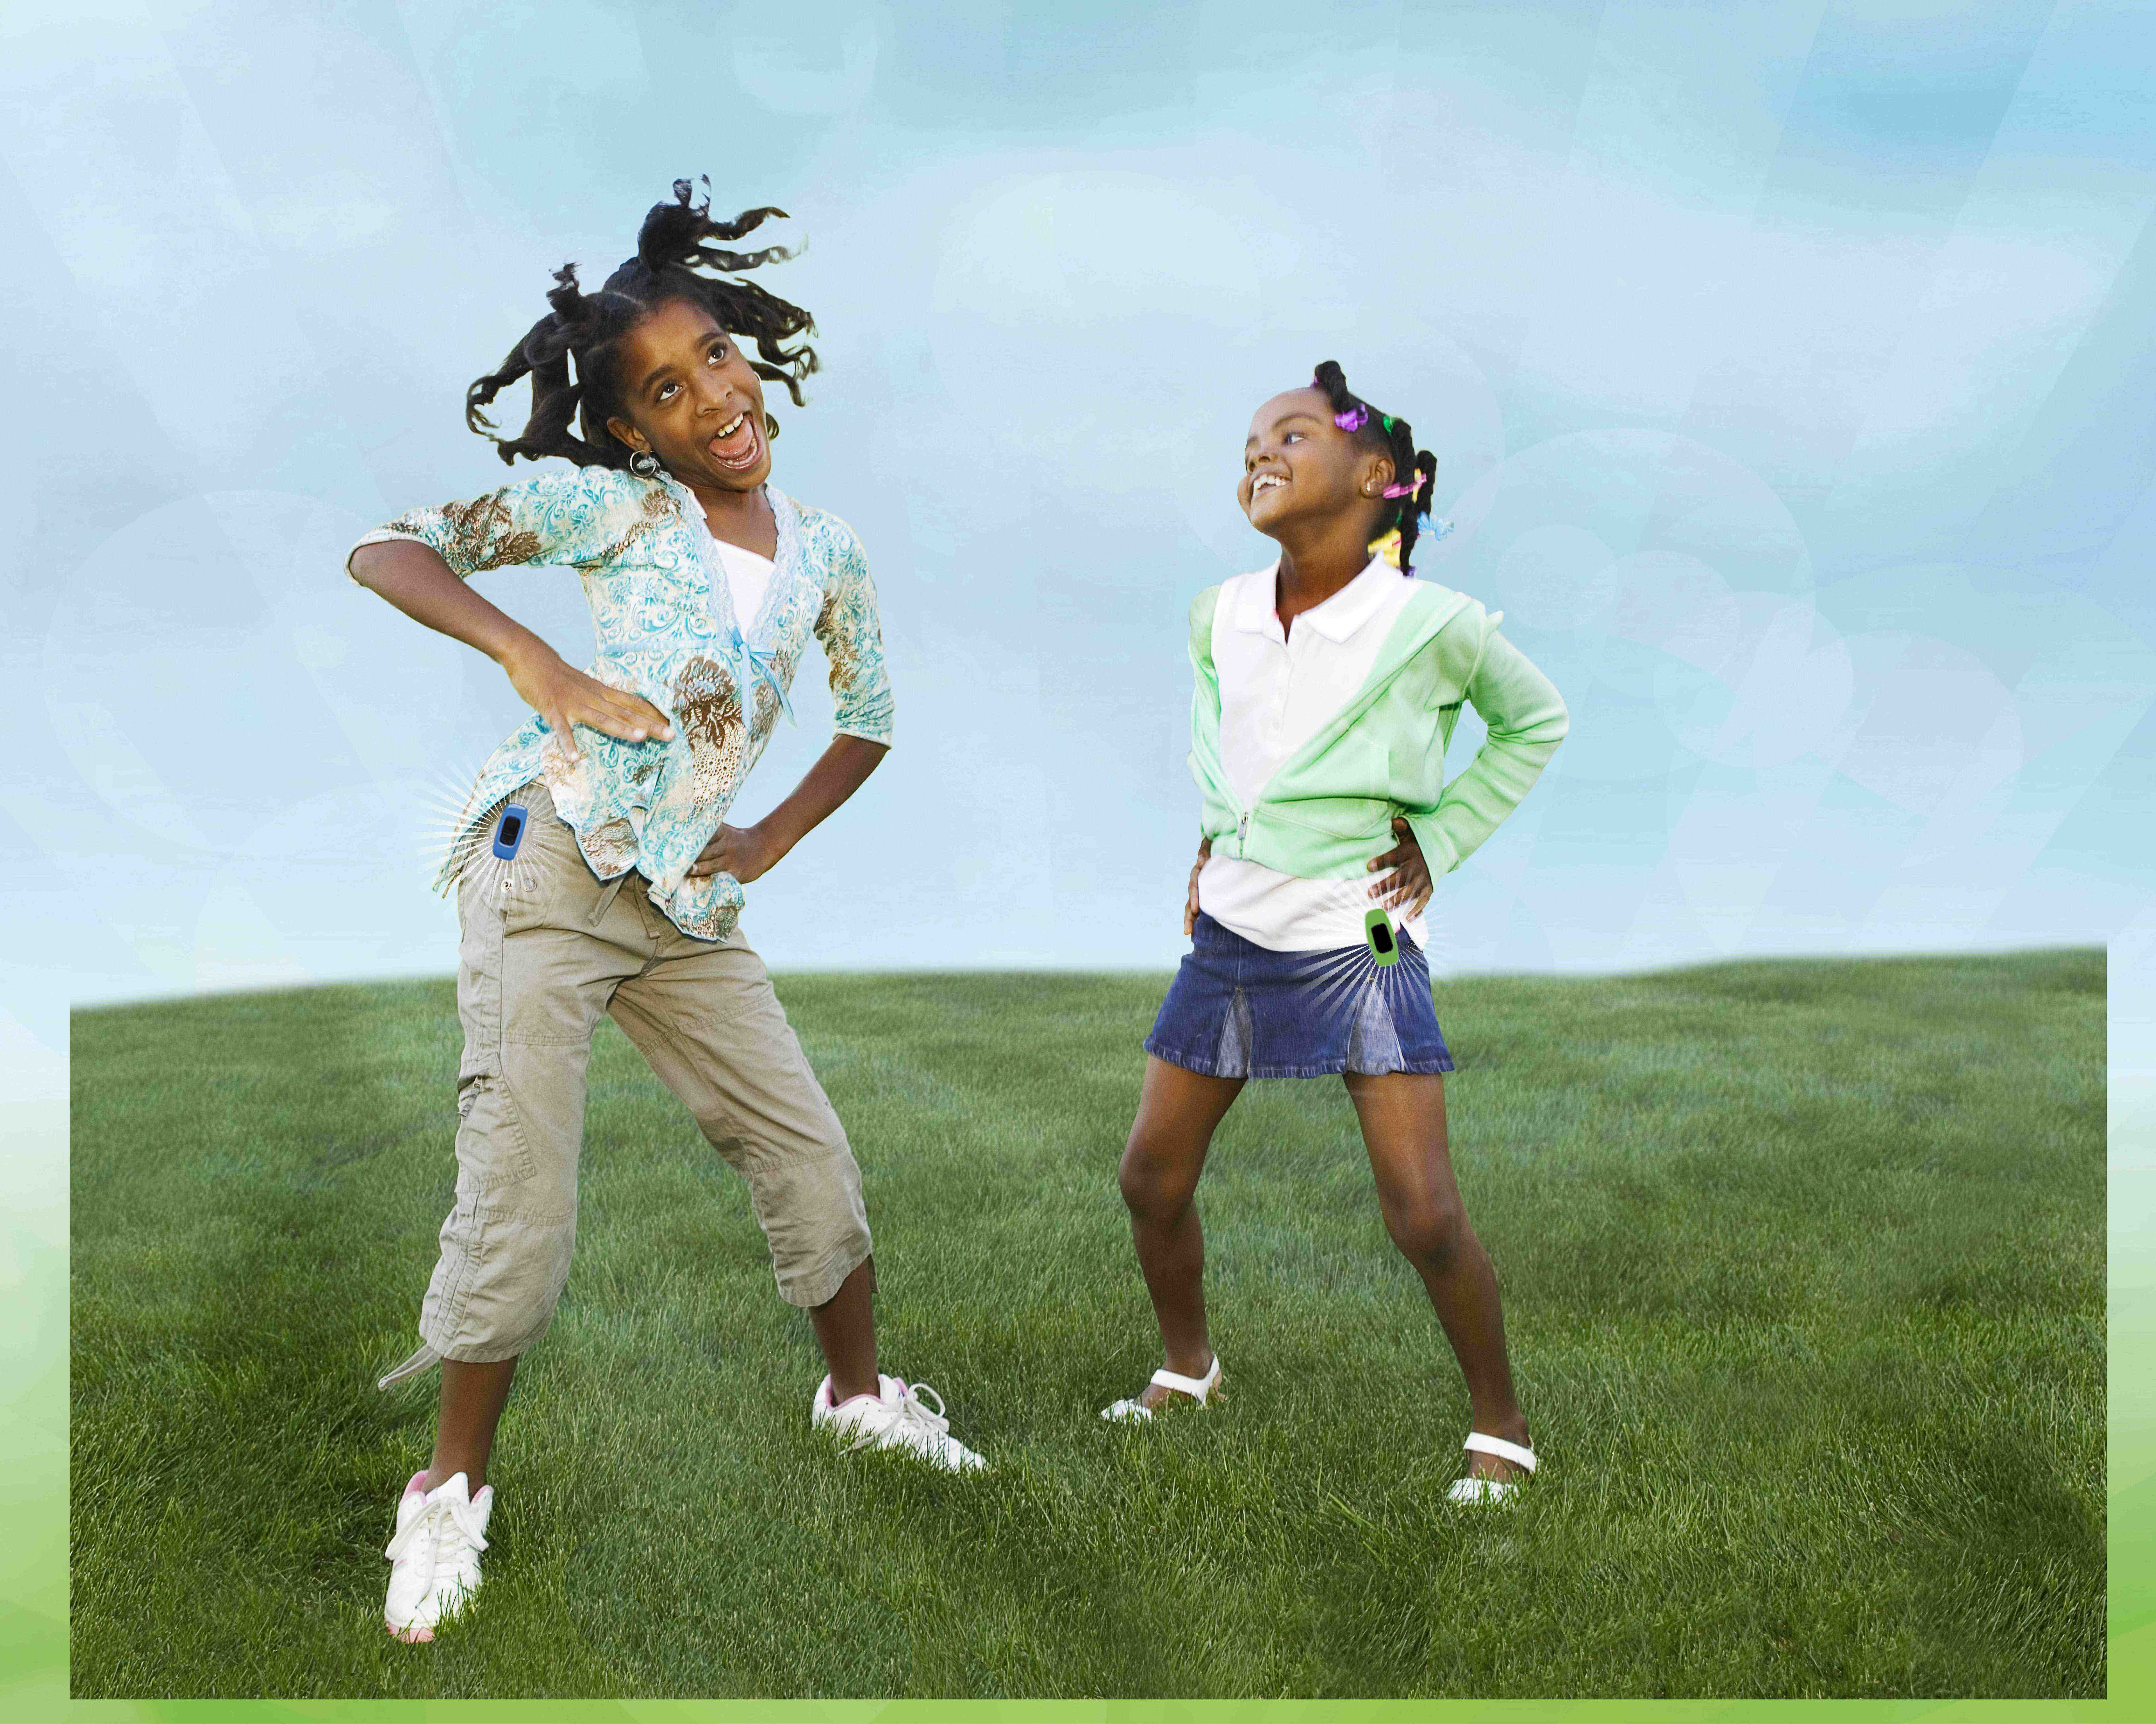 Zamzee is a research-proven tool that motivates kids to move more